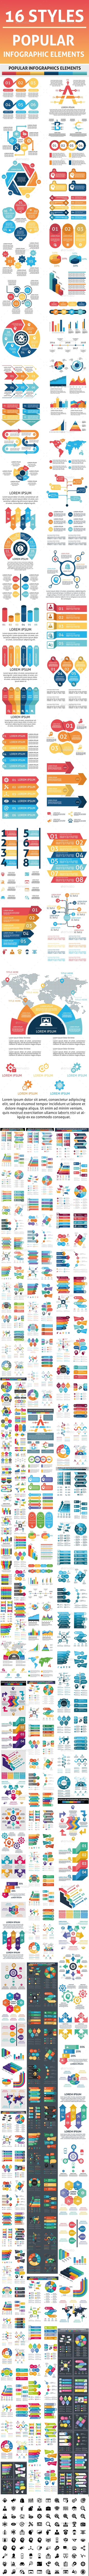 Bundle Popular Infographics Elements in Infographic Templates